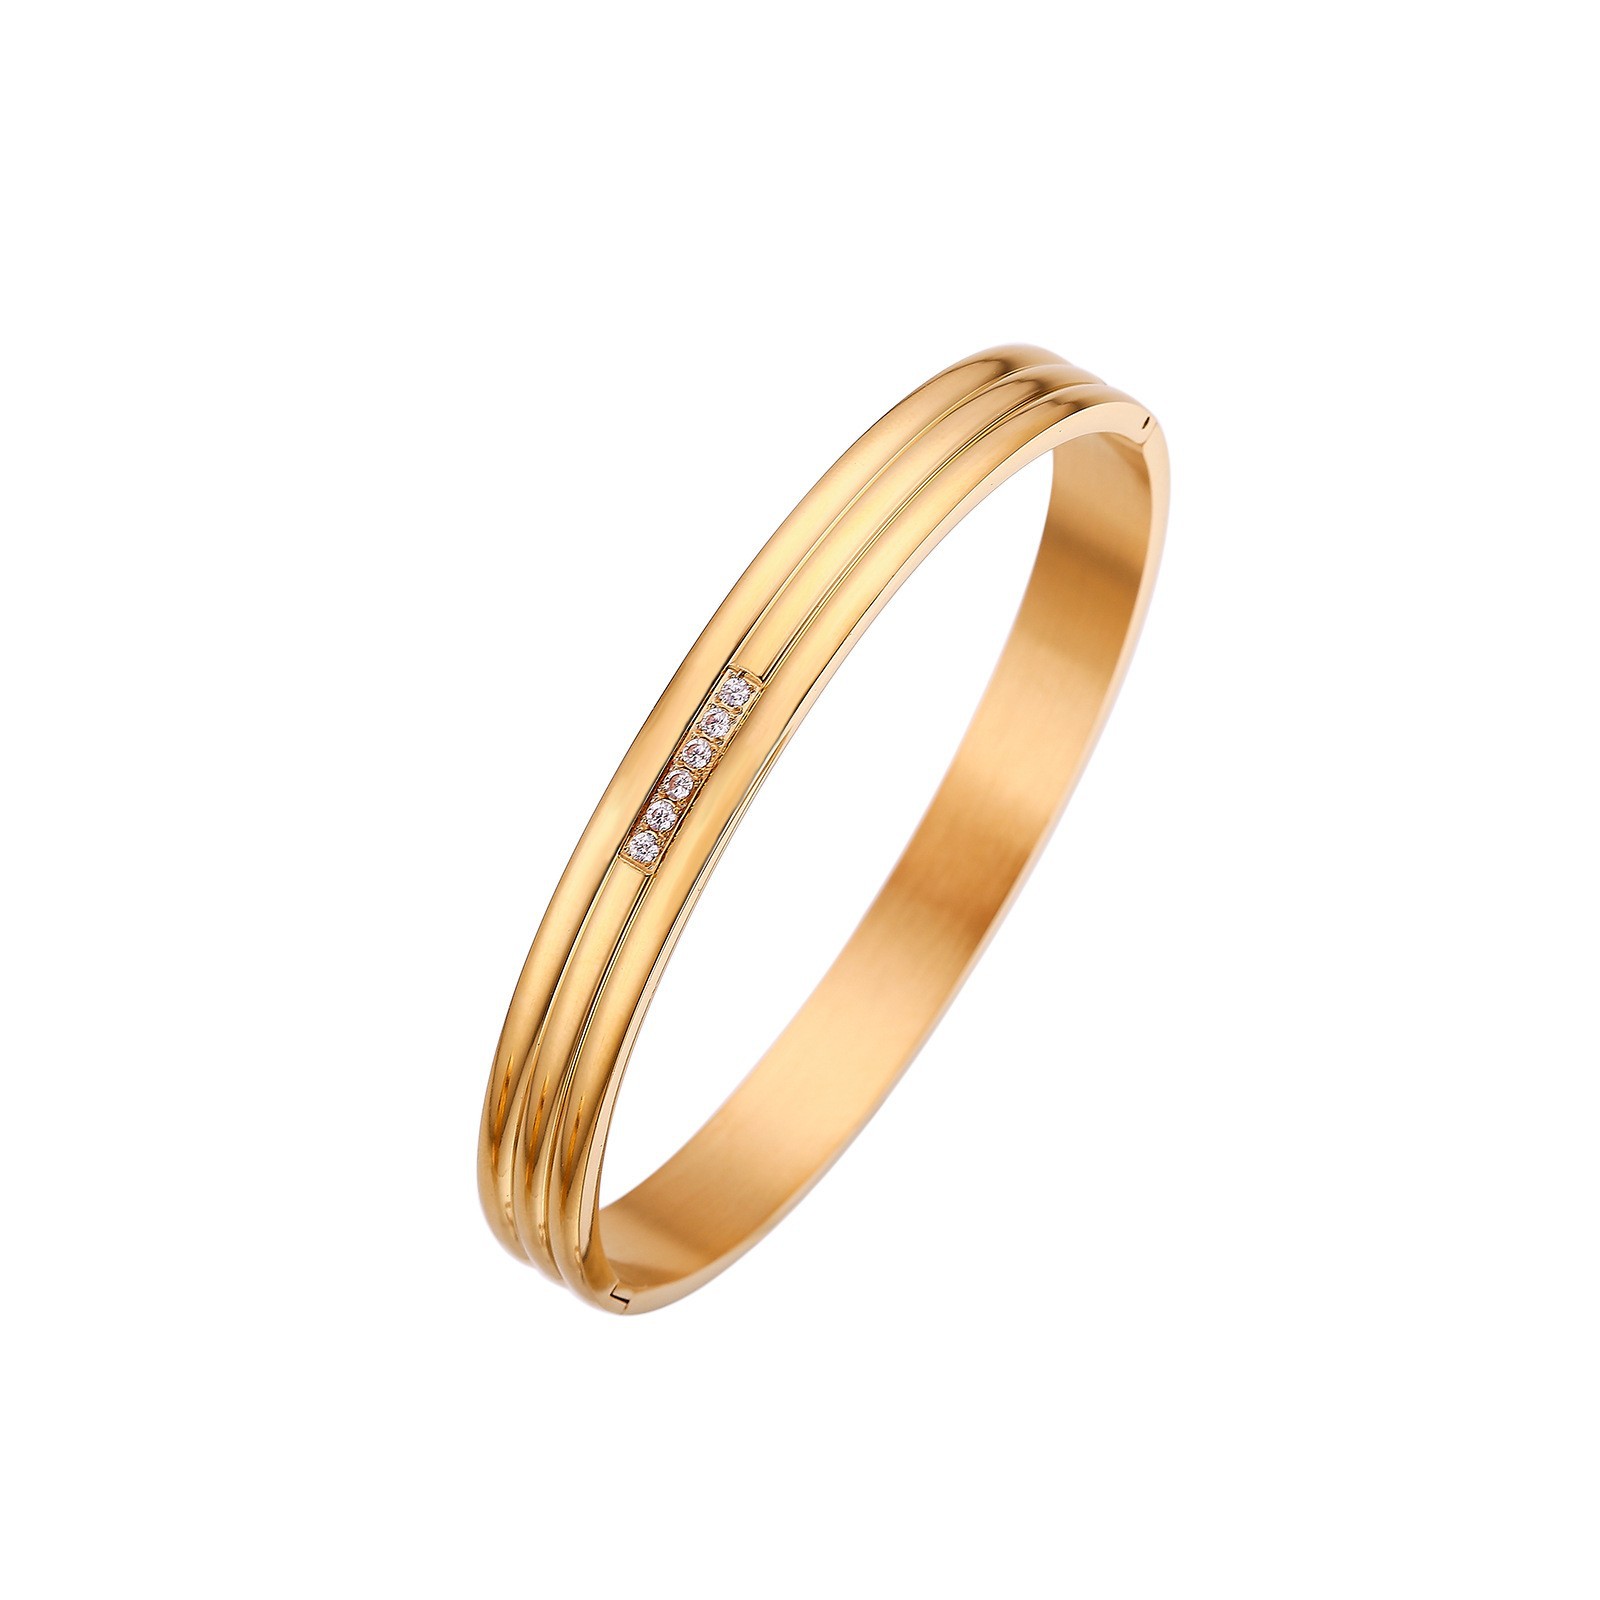 8:8mm gold - 64mm